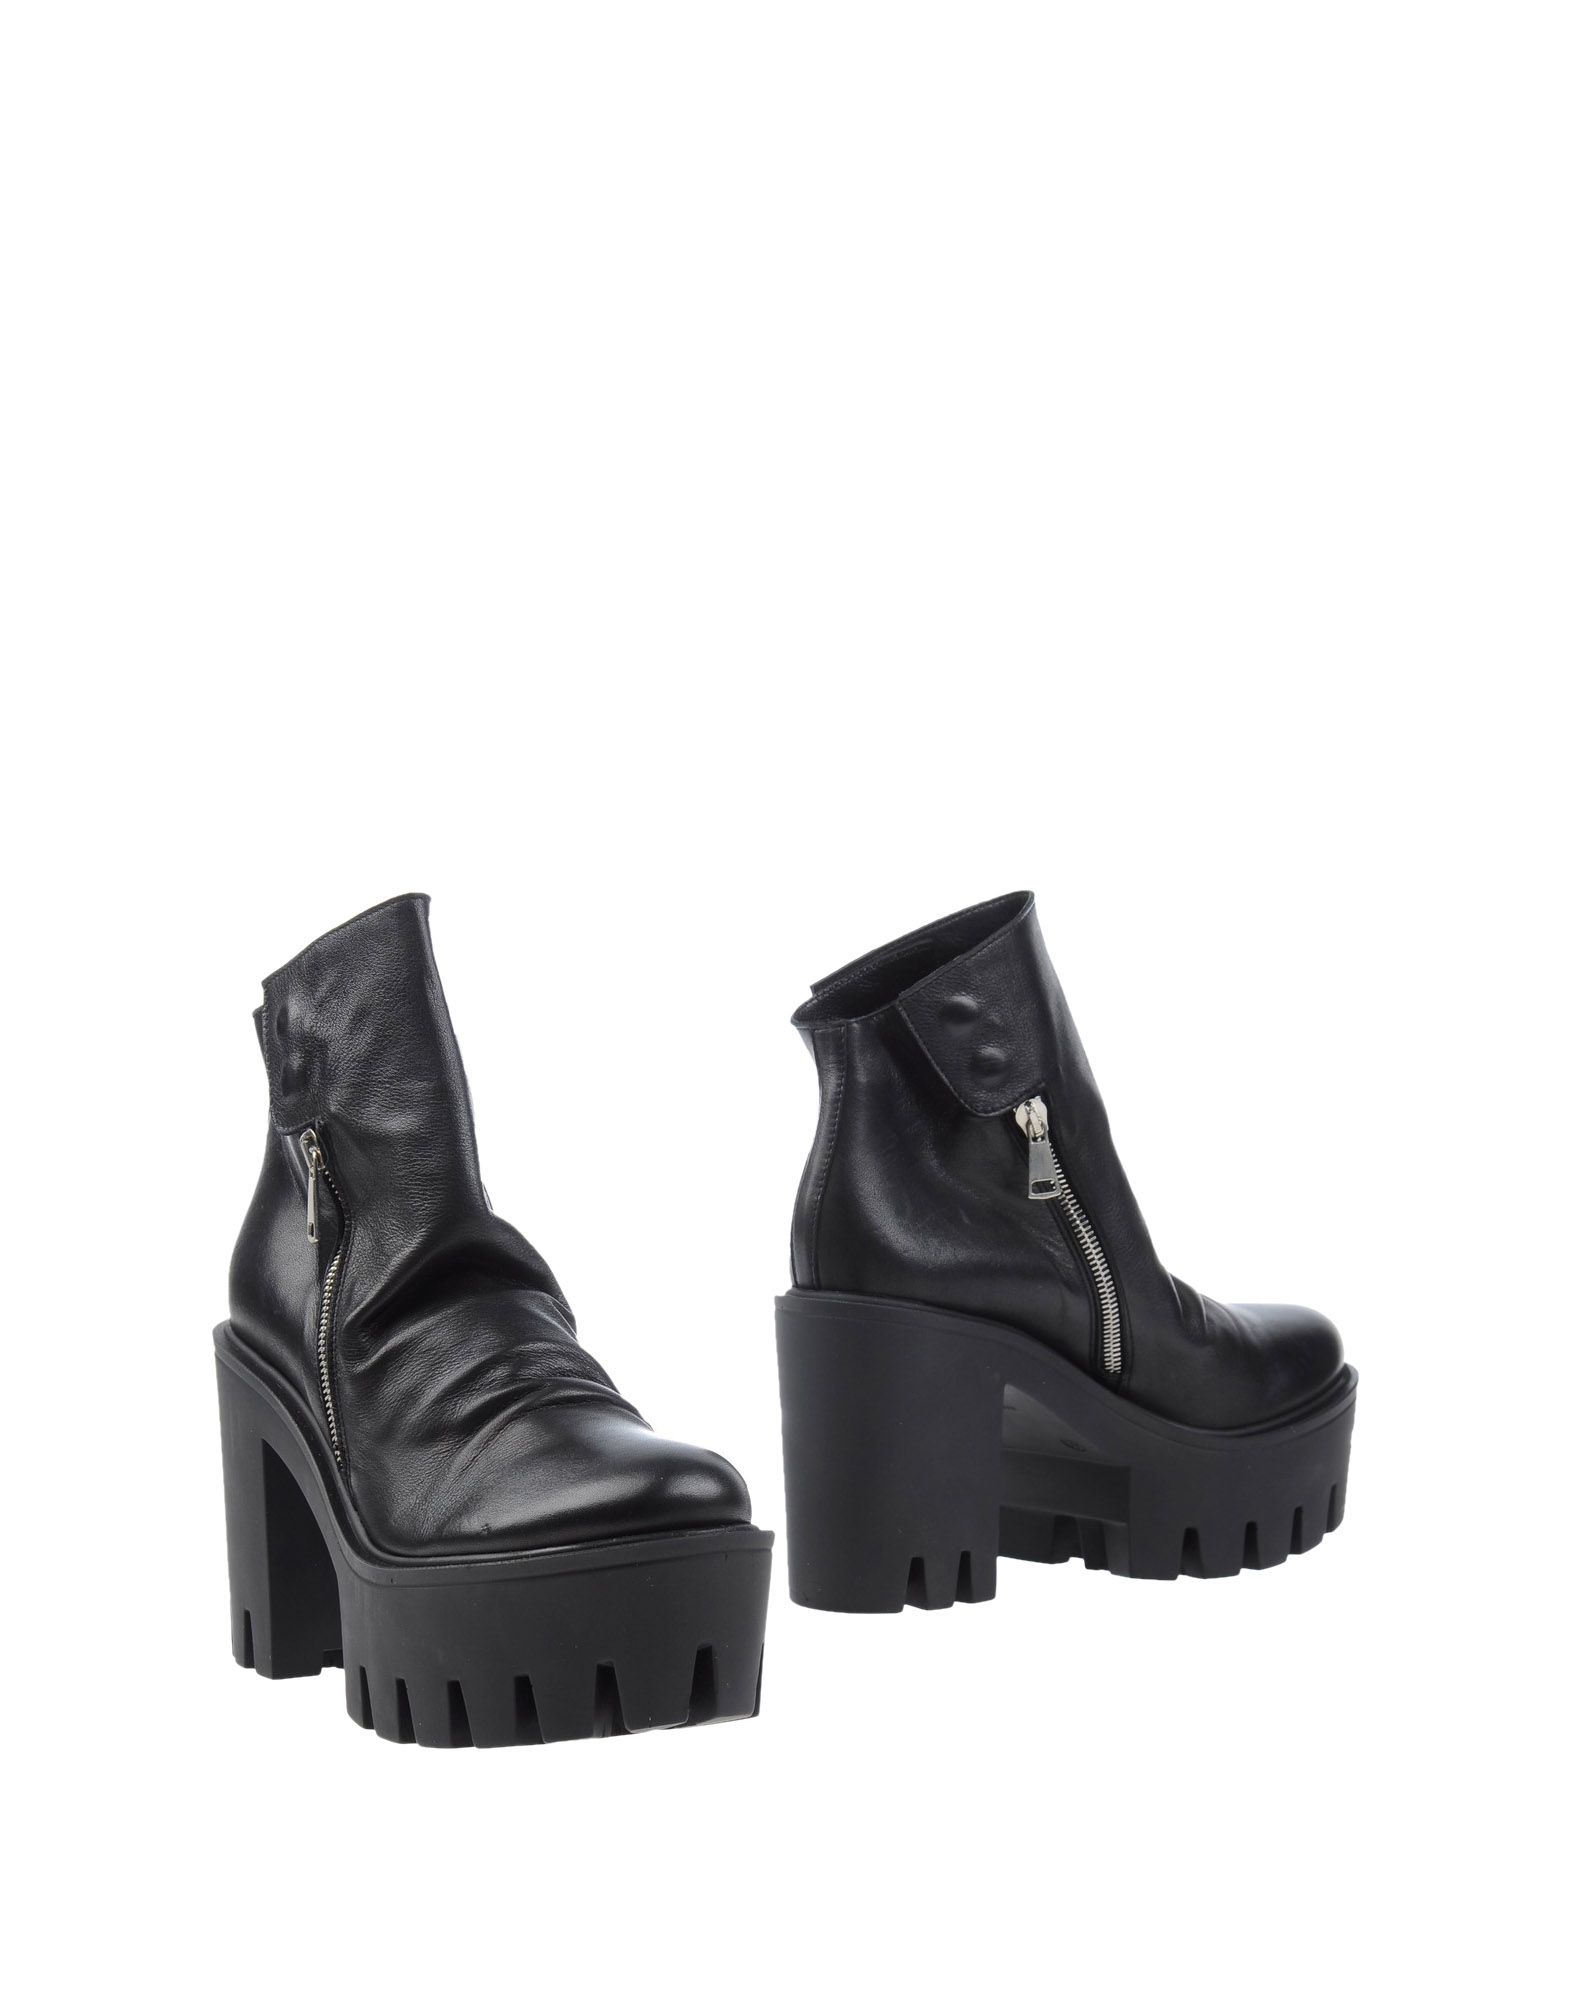 Lyst - Strategia Ankle Boots in Black